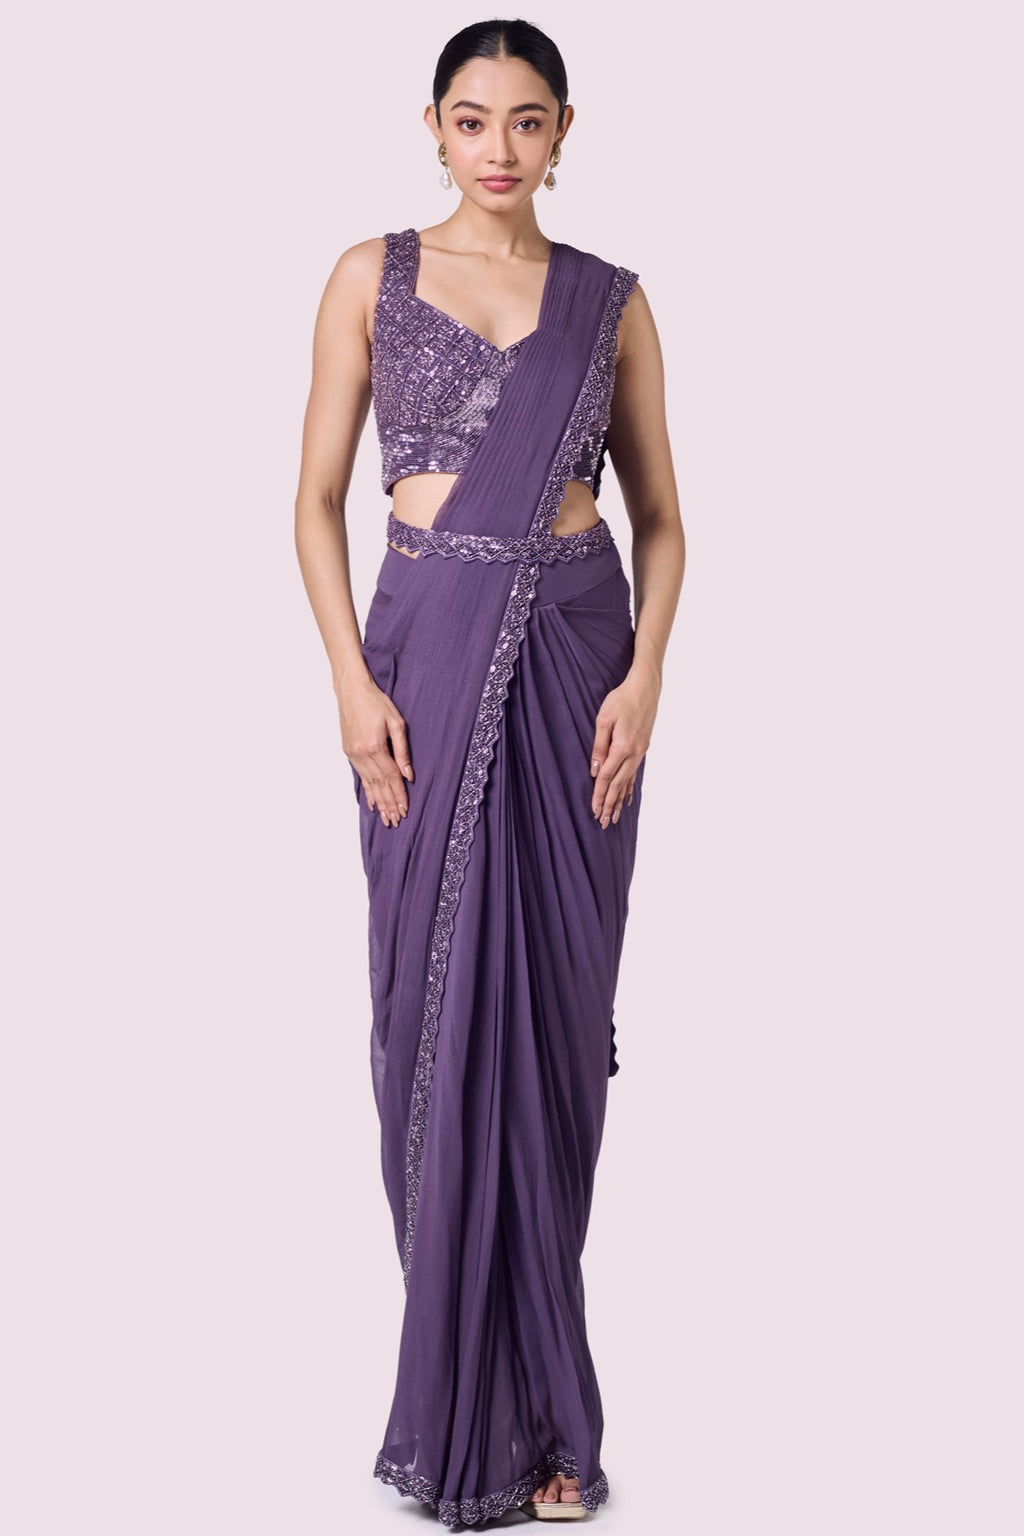 Buy lavender georgette pre-stitched saree online in USA with bustier blouse. Look your best at parties and weddings in beautiful designer sarees, embroidered sarees, handwoven sarees, silk sarees, organza saris from Pure Elegance Indian saree store in USA.-full view